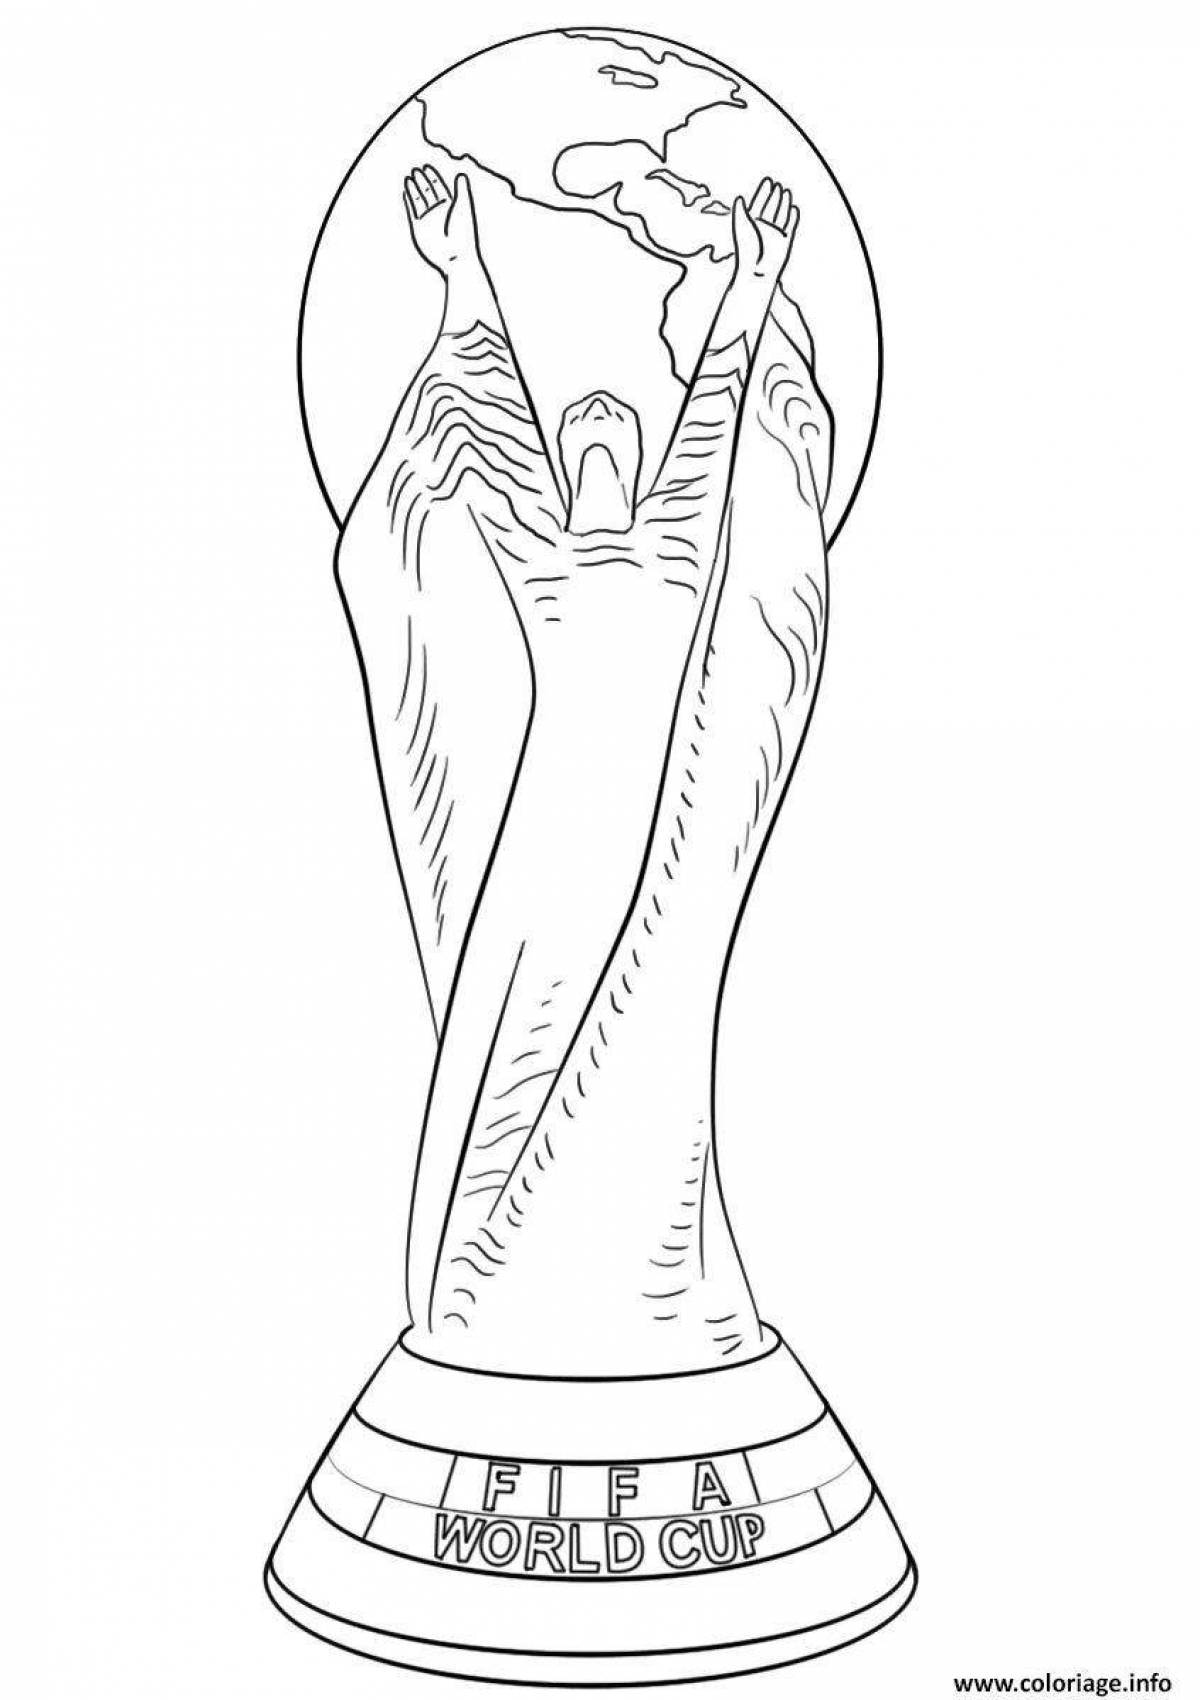 2022 World Cup playful coloring page